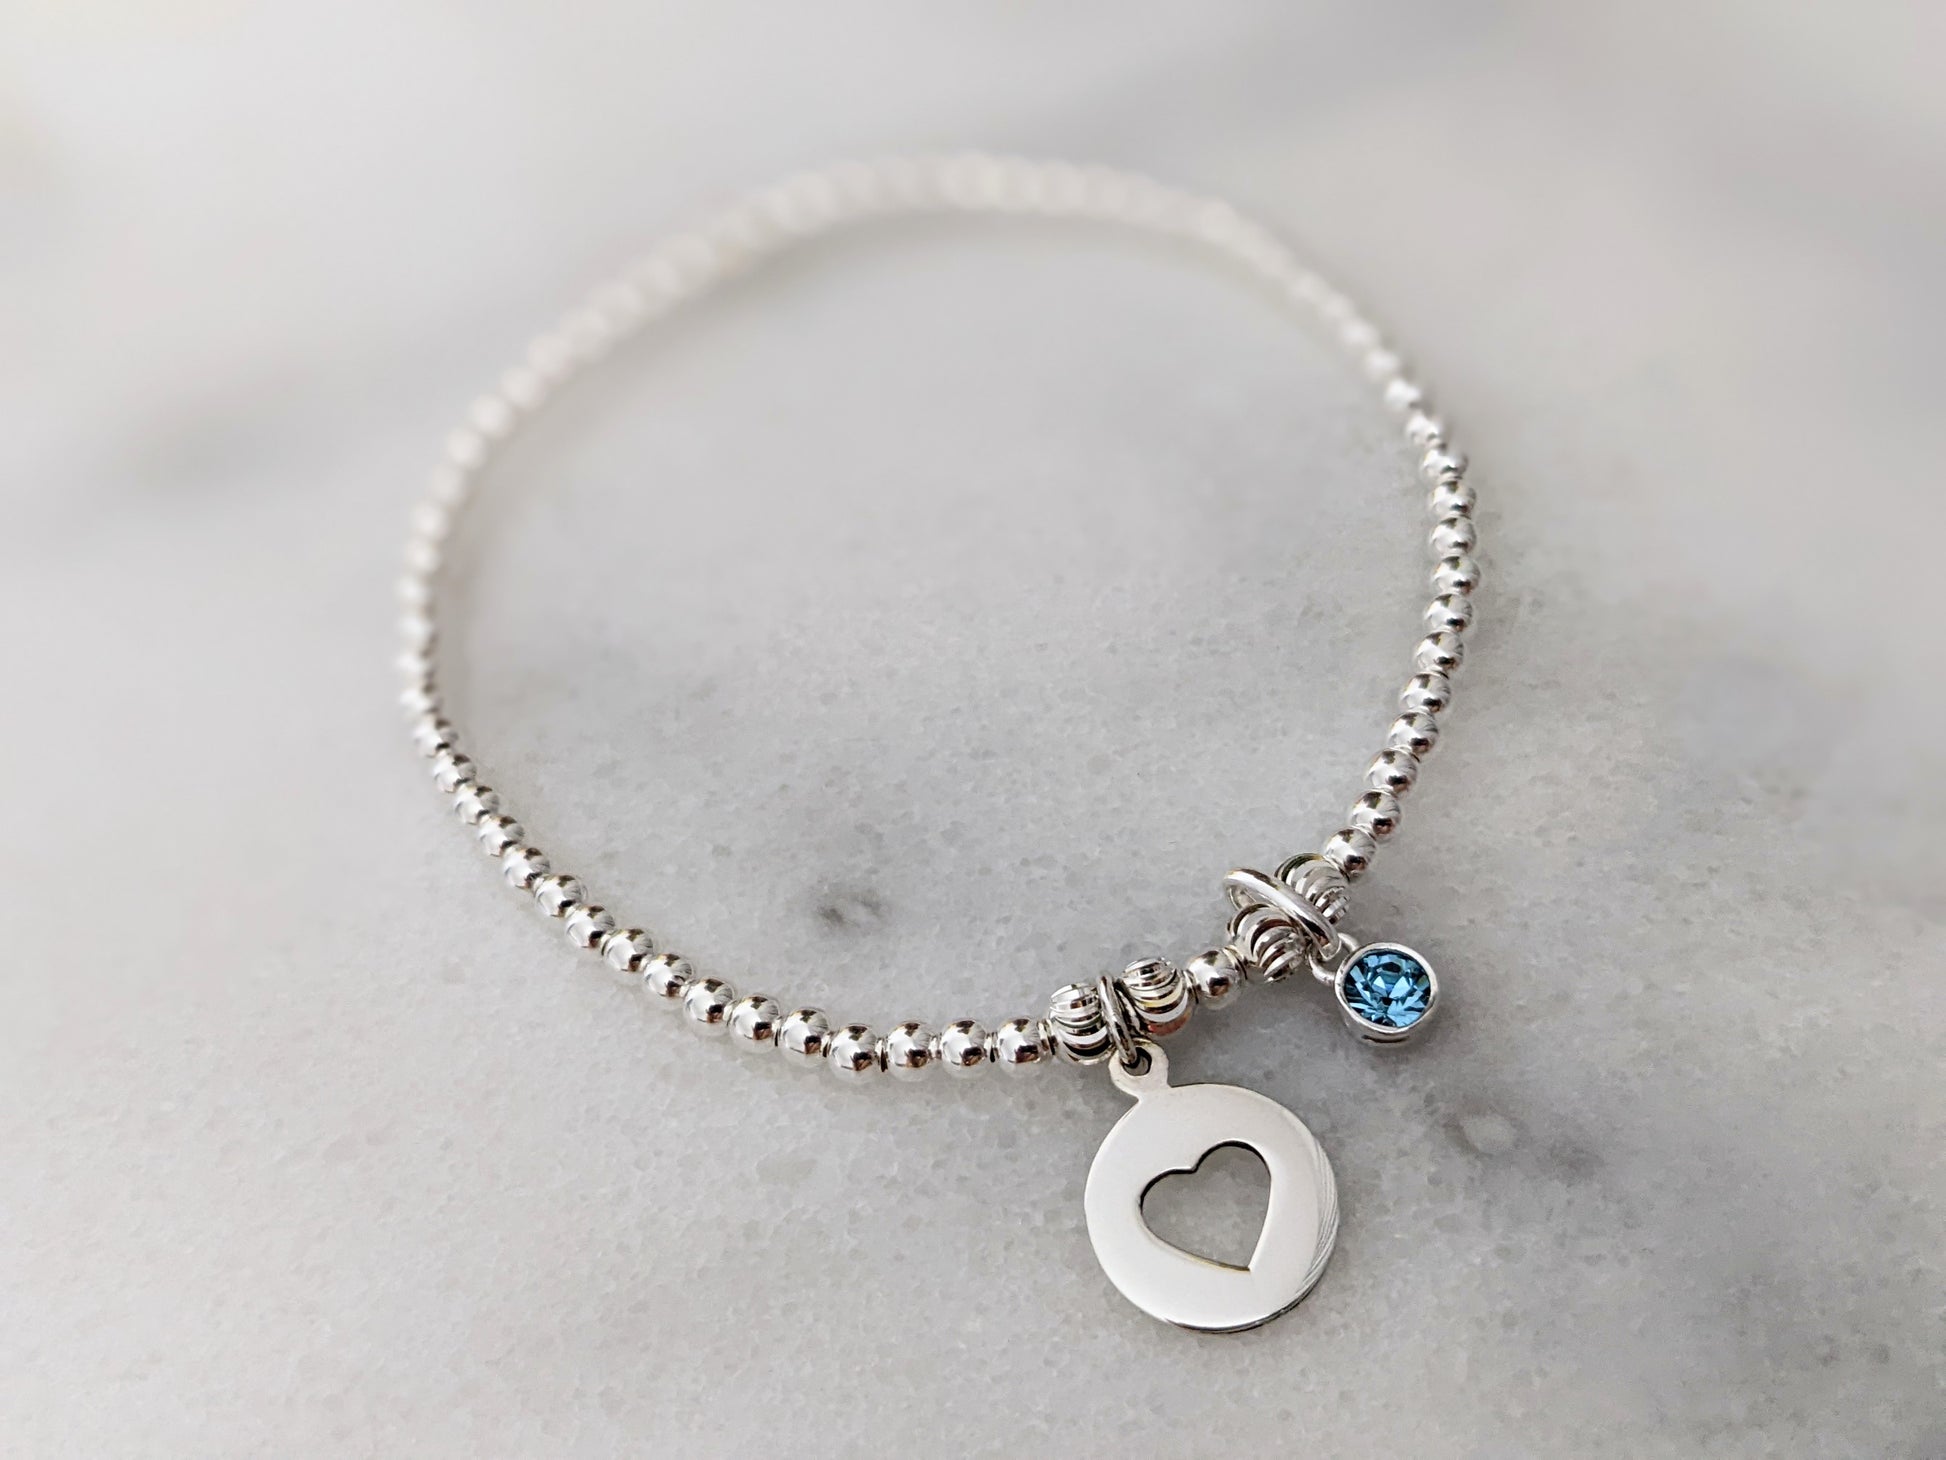 Sterling Silver Heart and Birthstone Bracelet - With Love Jewellery UK